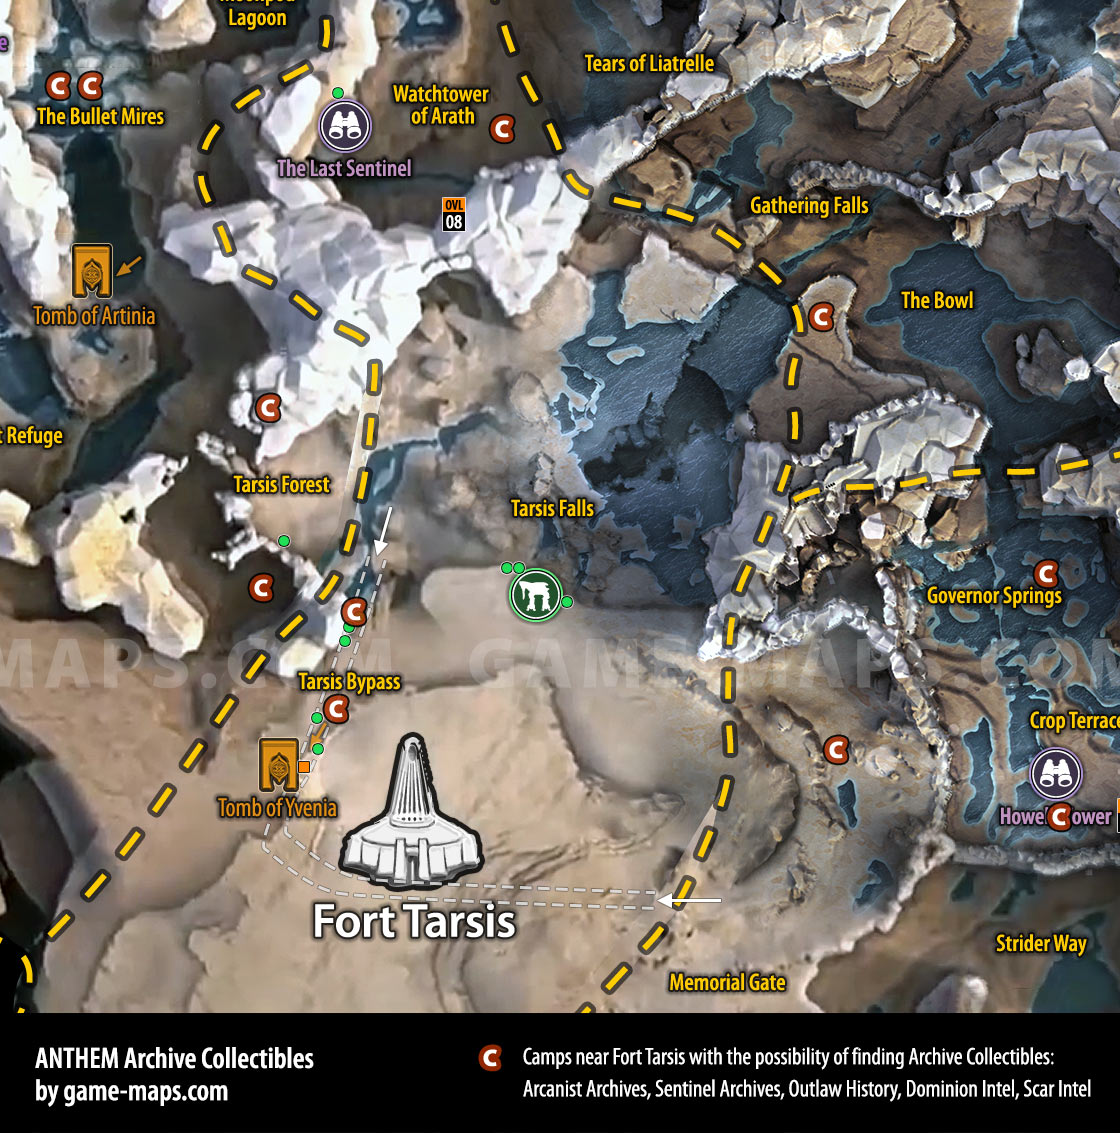 Anthem - Camps near Fort Tarsis with the possibility of finding Archive Collectibles.